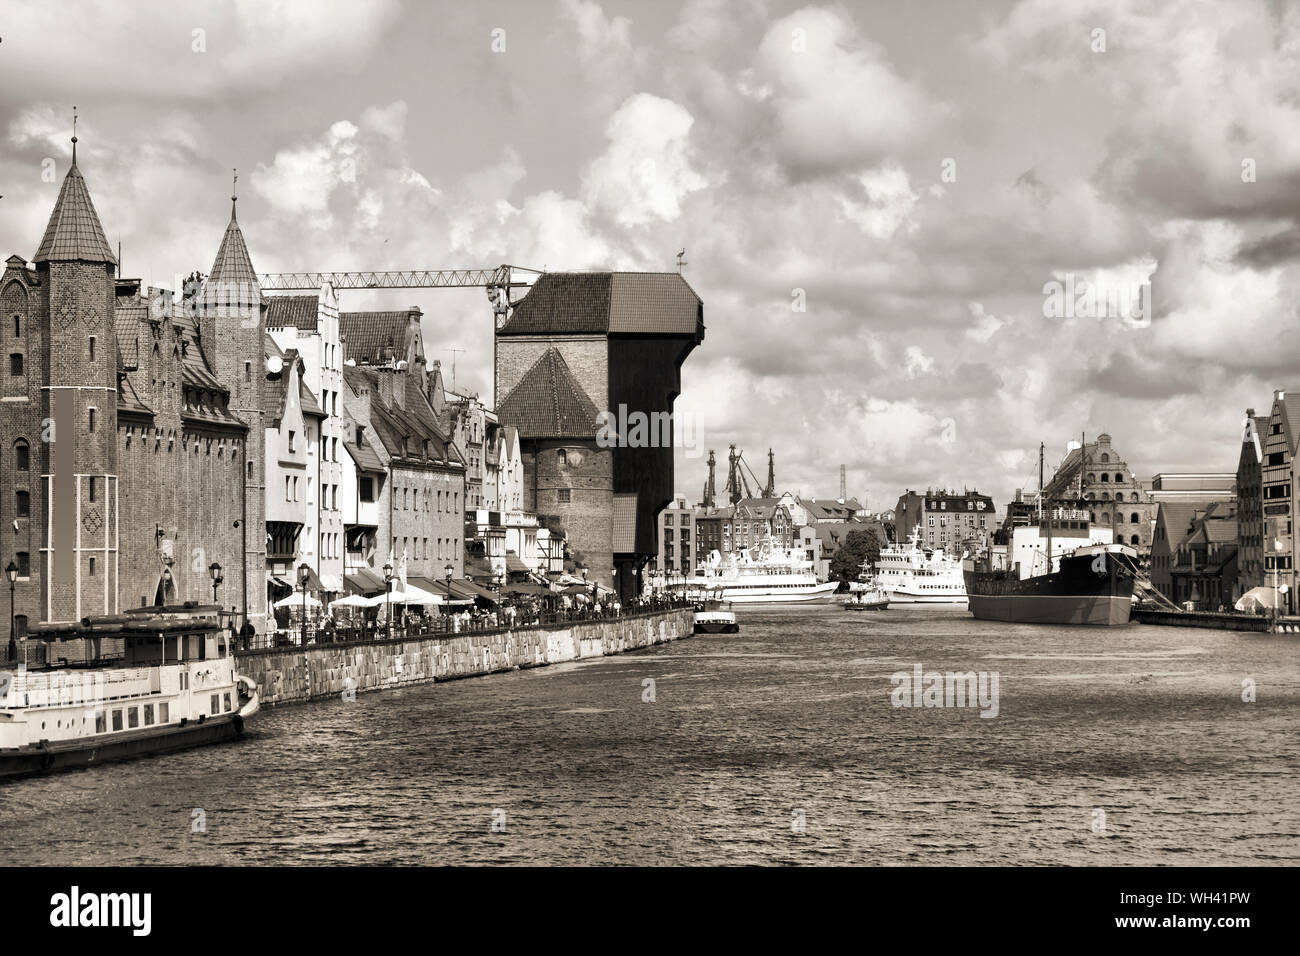 Poland - Gdansk city (also know nas Danzig) in Pomerania region. Old town view with Motlawa river and famous Crane. Stock Photo